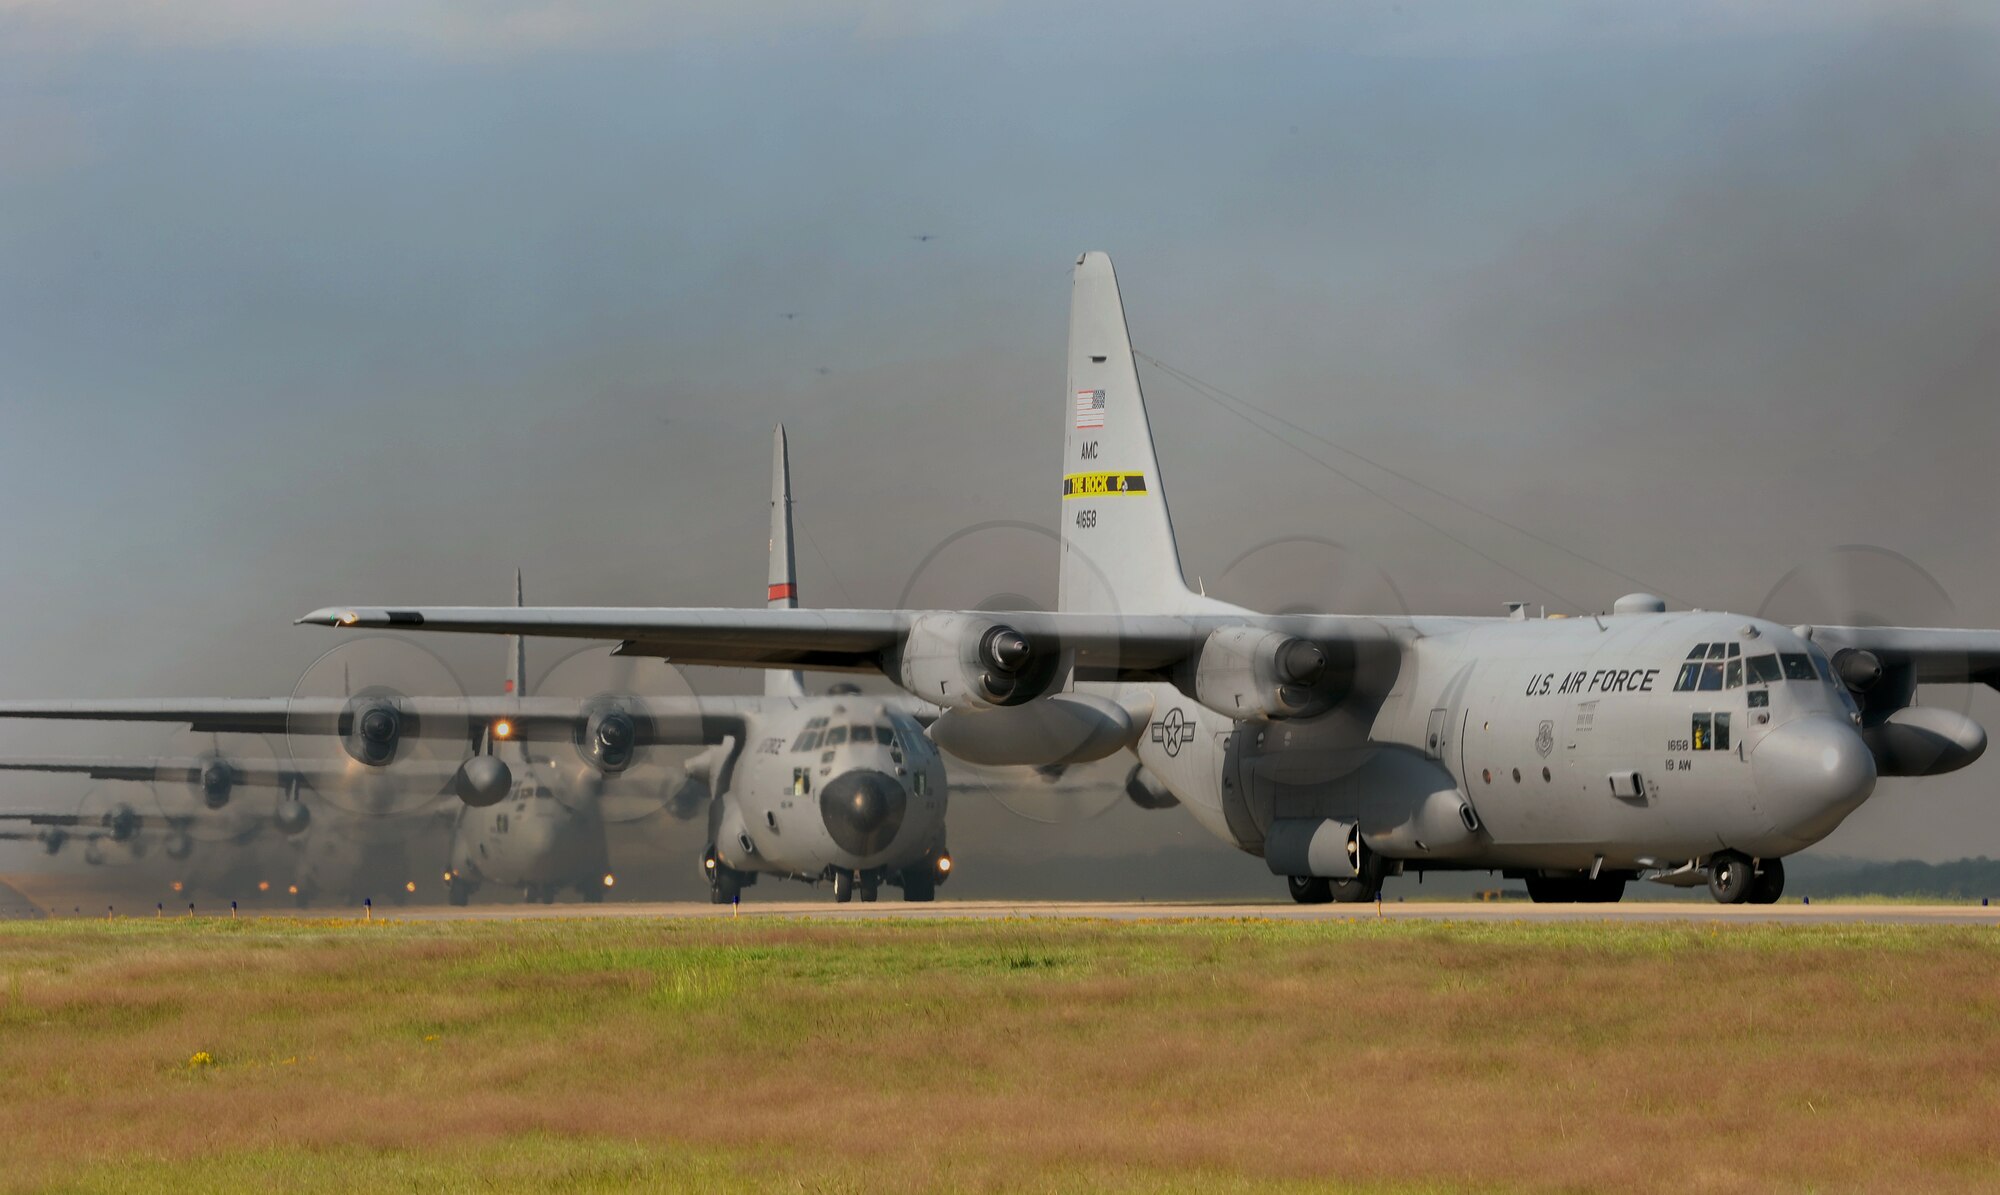 C-130s line the runway before a flight Oct. 3, 2012, at Little Rock Air Force Base, Ark. The aircraft were part of a 14-ship formation.  (U.S. Air Force photo by Staff Sgt. Jessica Condit)